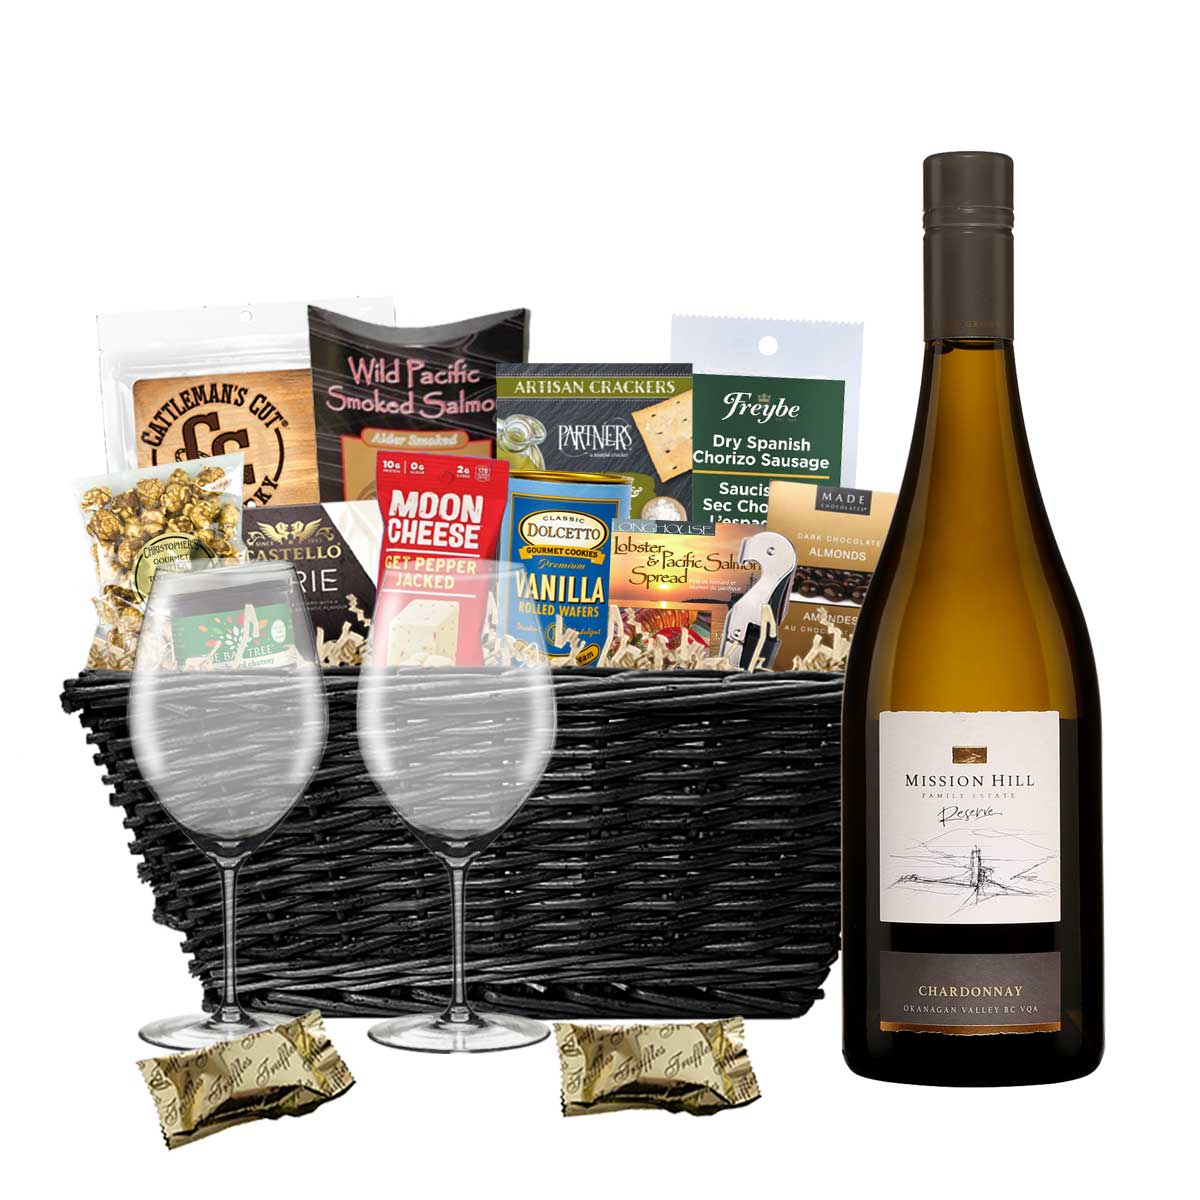 TAG Liquor Stores BC - Mission Hill Reserve Chardonnay 750ml Gift Basket